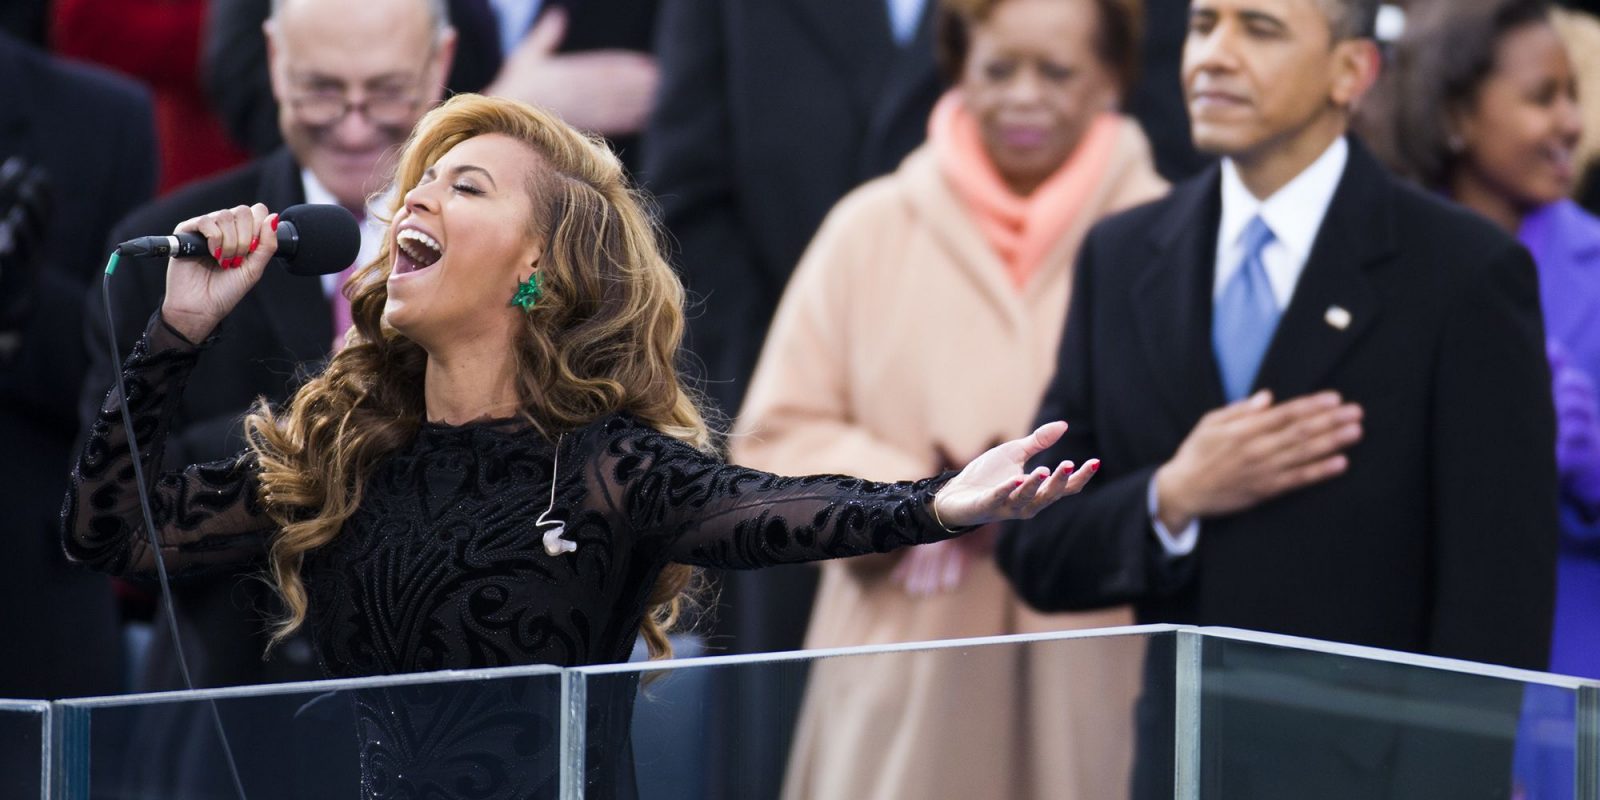 Beyonce sings the U.S. National Anthem as President Barack Obama listens during swearing-in ceremonies on the West front of the U.S. Capitol in Washington (Photo by Brooks Kraft LLC/Corbis via Getty Images)